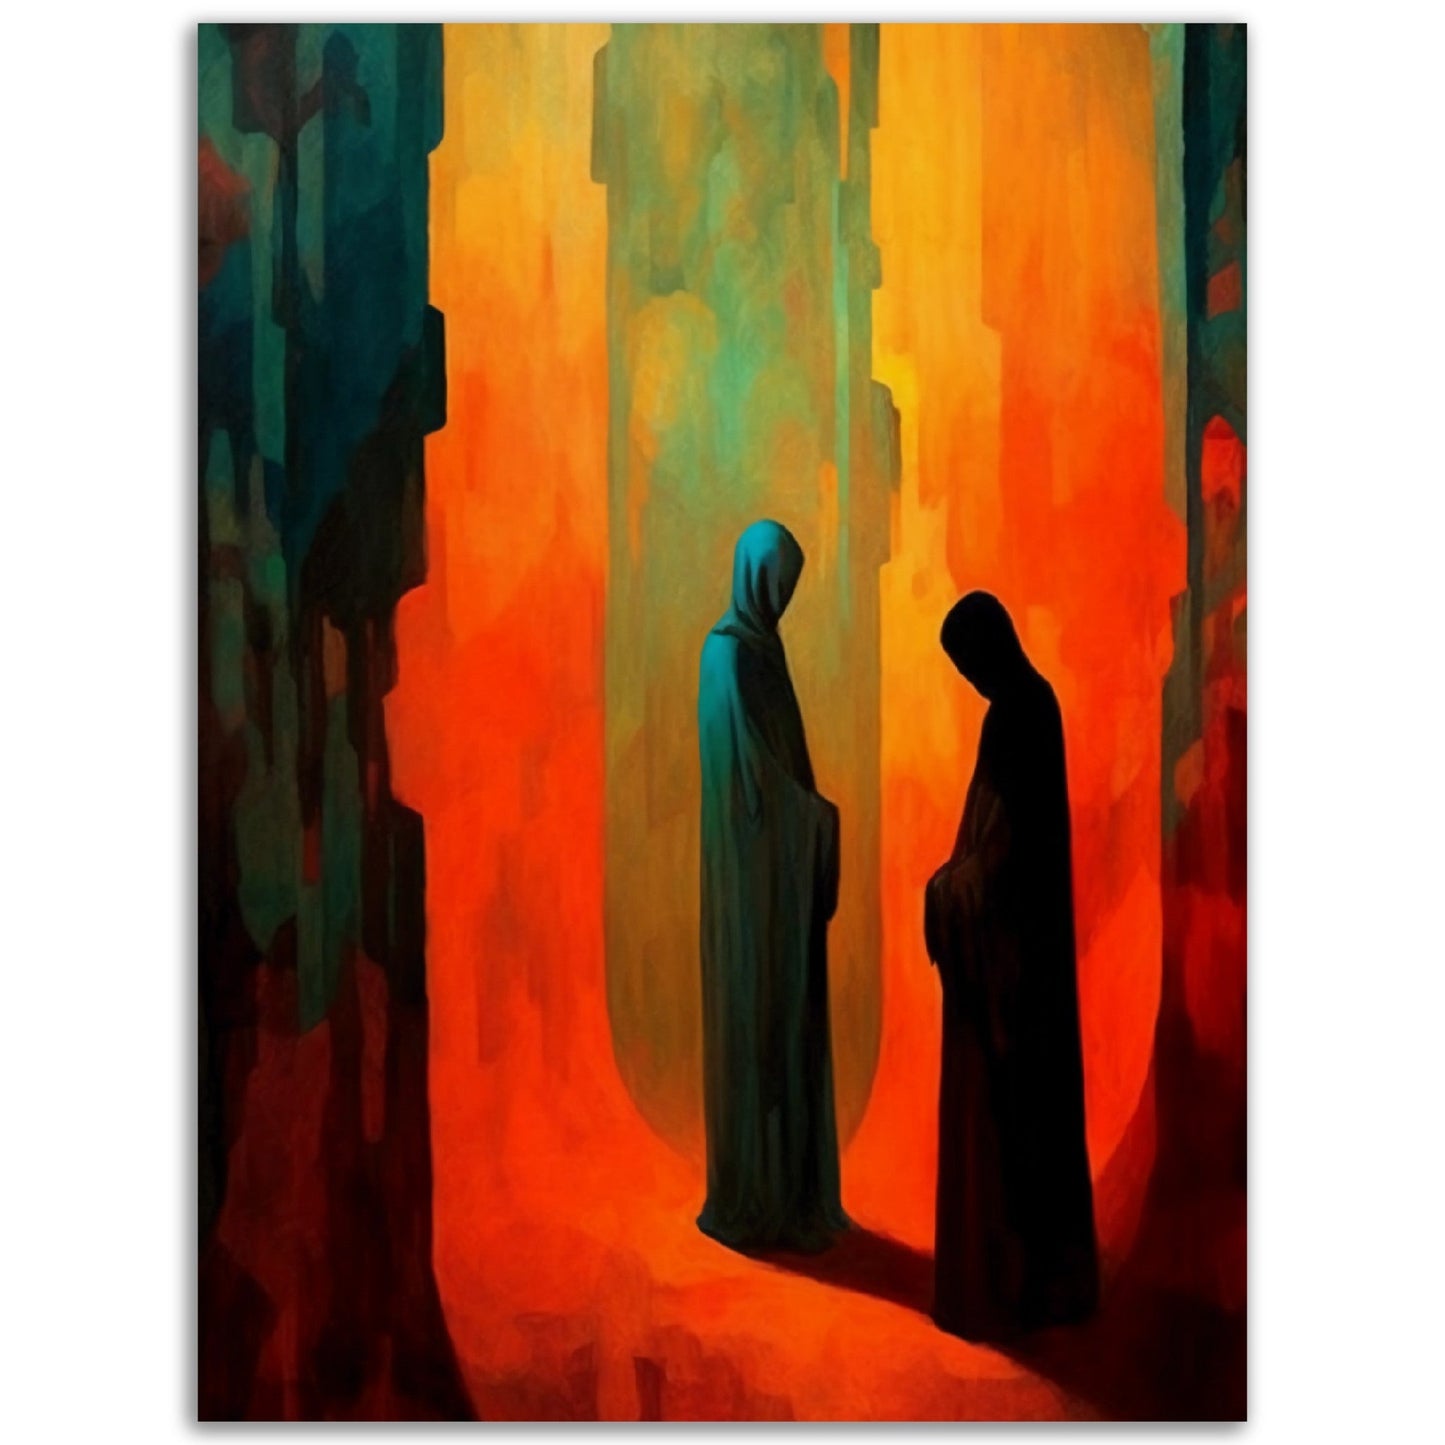 A high-quality colored wall art poster featuring two people standing in a dark cave called "The Exchange".